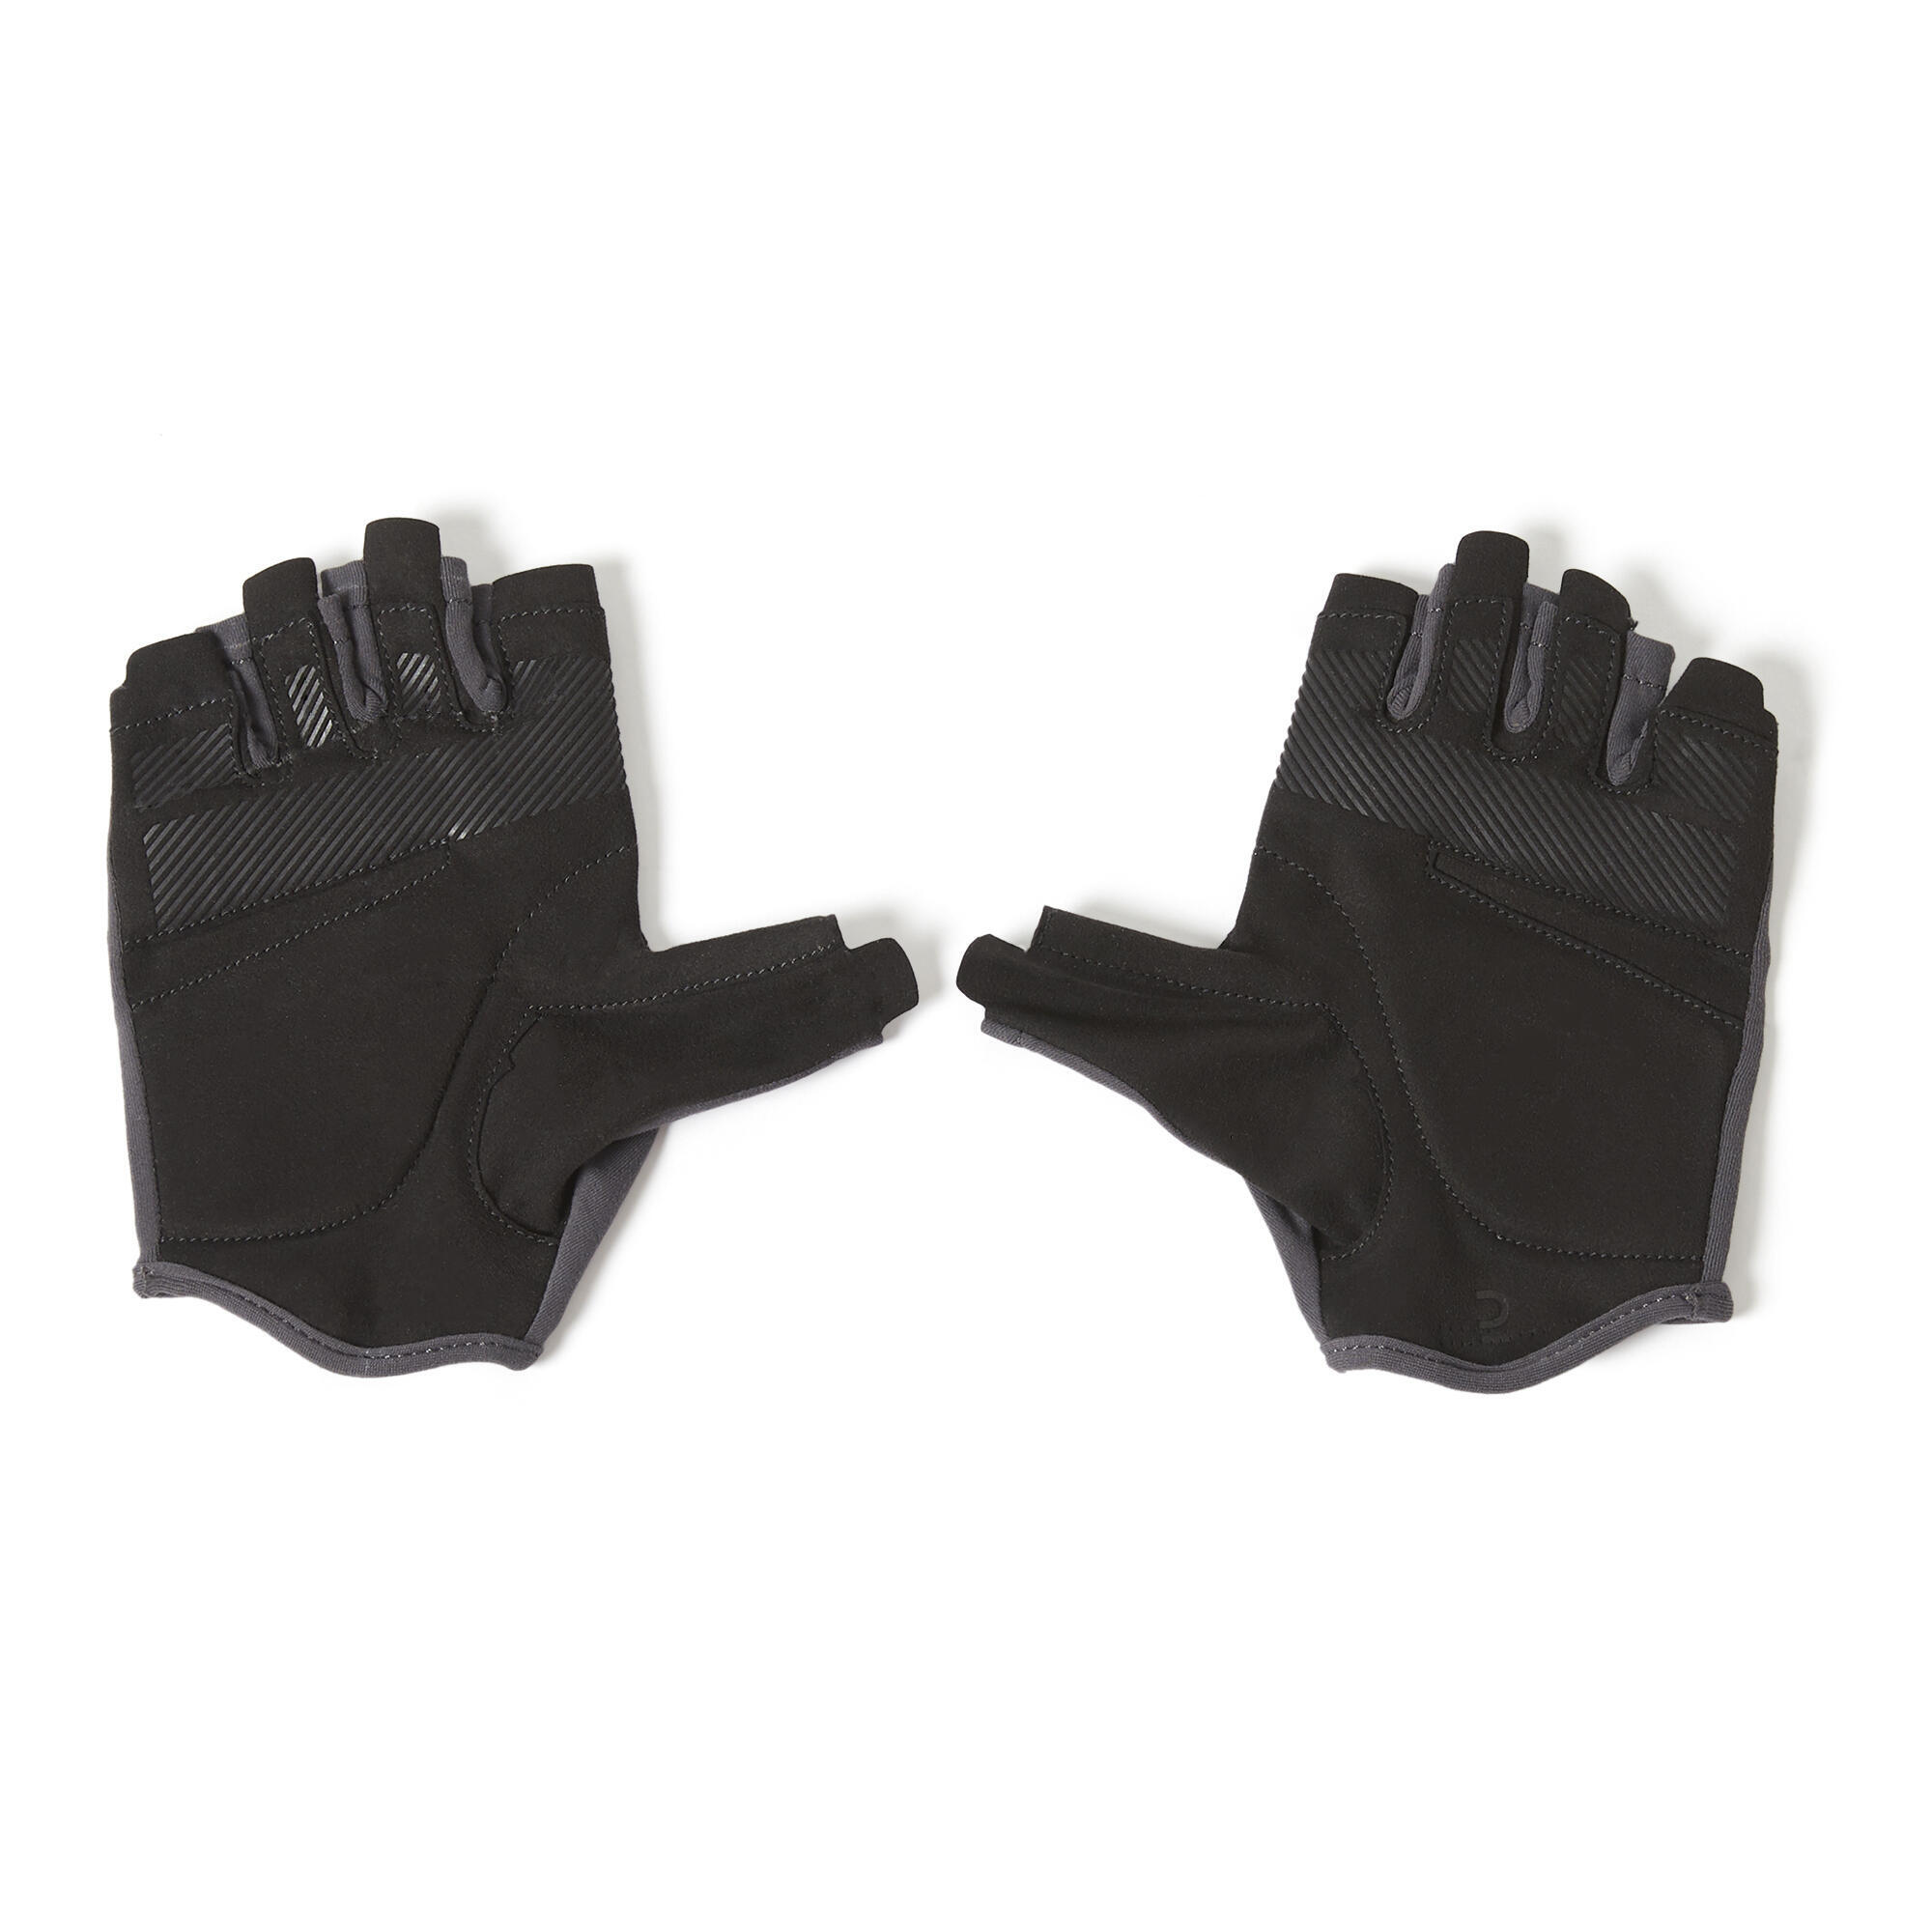 Women's Breathable Weight Training Gloves - Grey 2/3